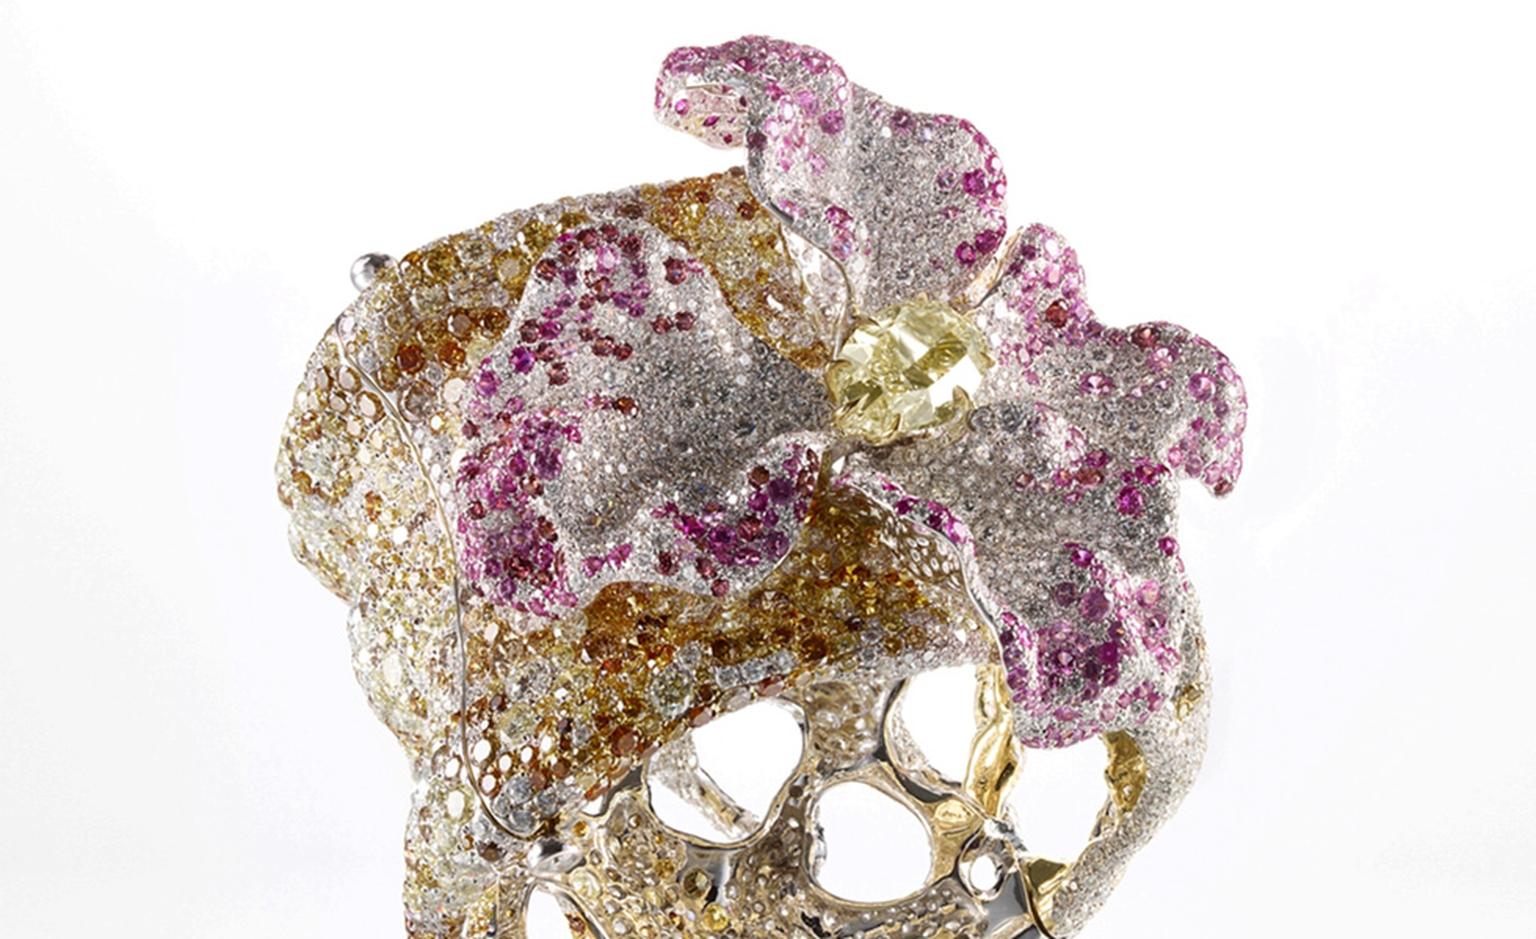 Cindy Chao The Art Jewel, Black Label Masterpiece, Solstice Cuff in the form of a bejewelled azalea set with diamonds, rubies, pink sapphires and rhodolites. The jewel sold at Sothby's Hong Kong sale for US $465,000